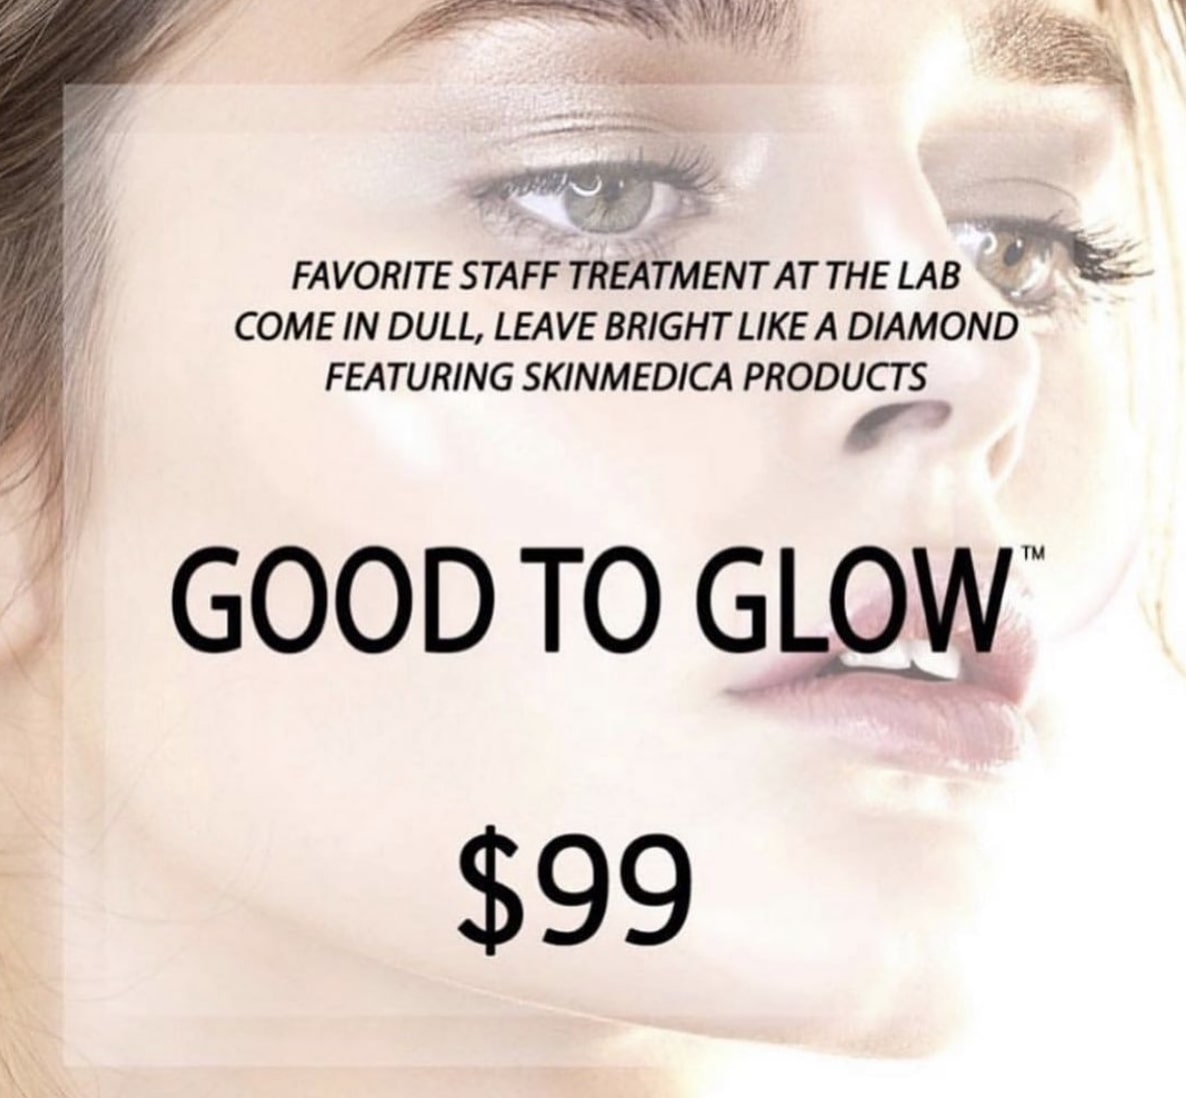 good to glow ut beauty lab and laser